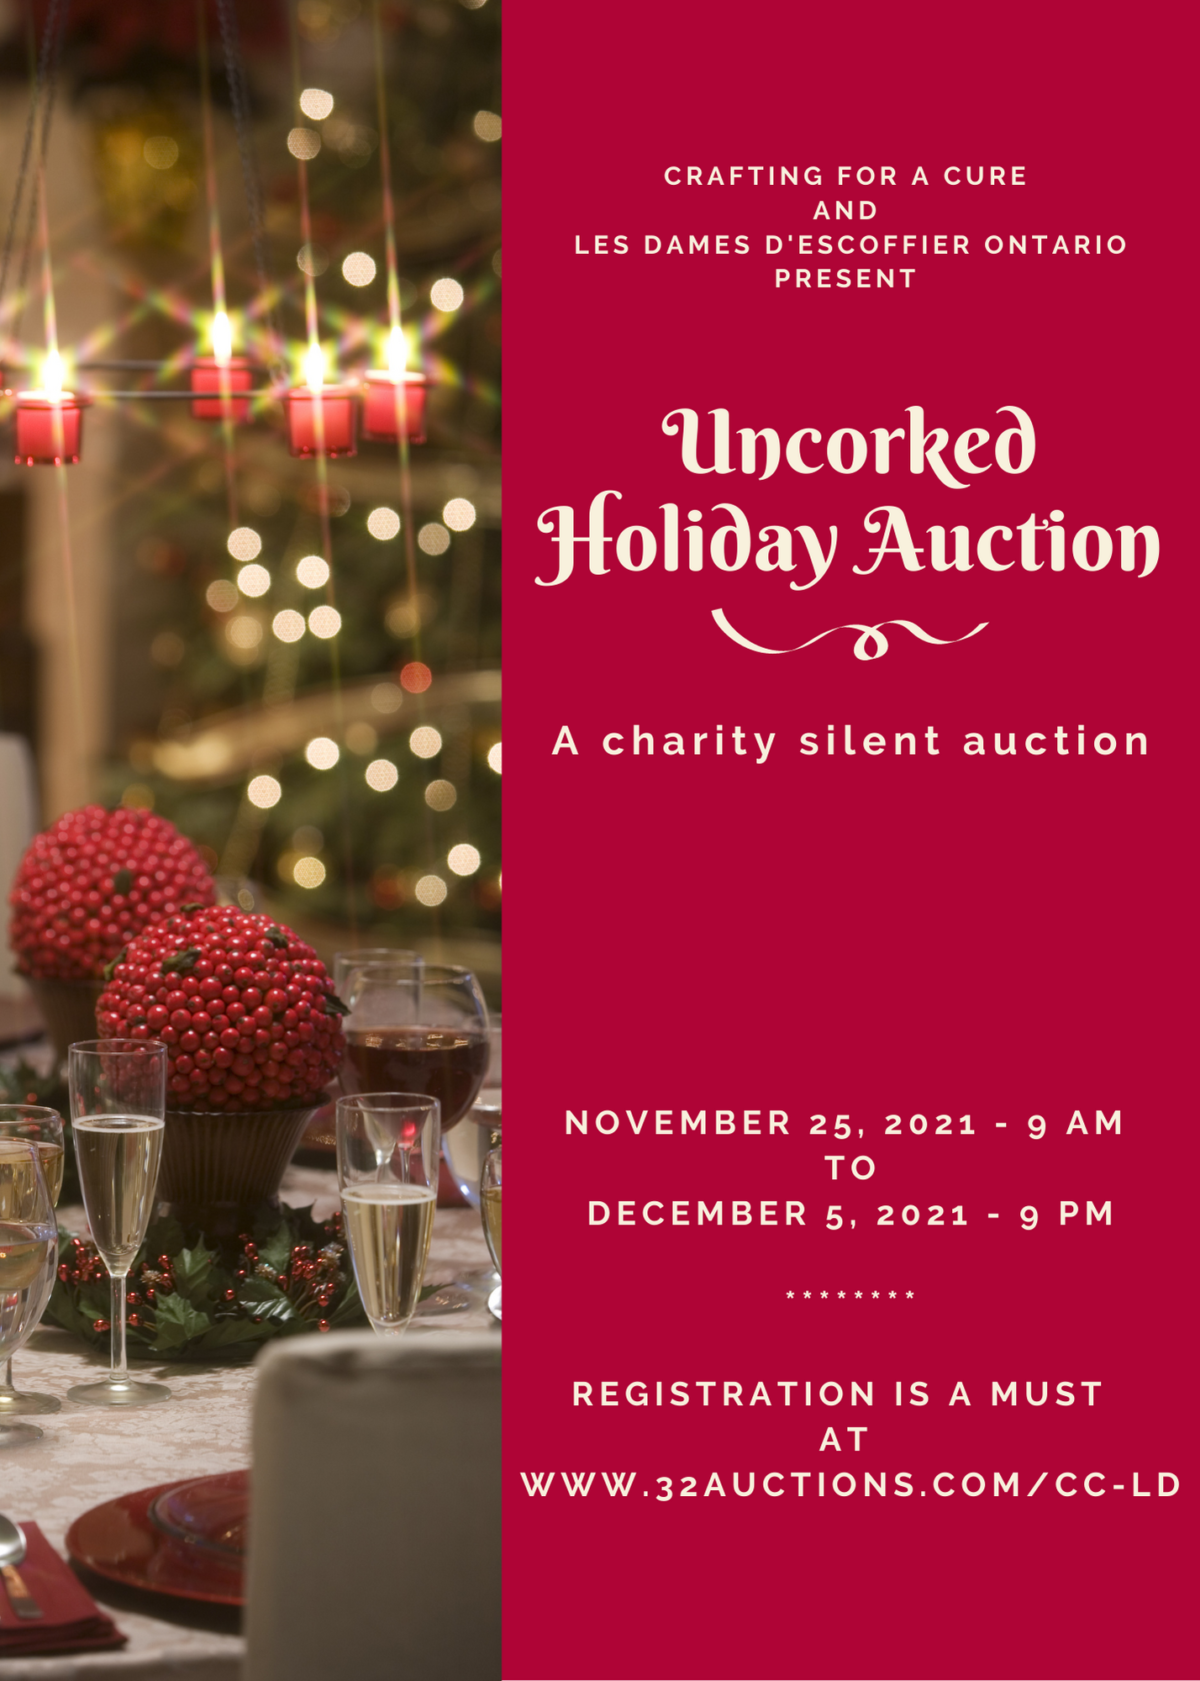 Save the Date: Les Dames d’Escoffier Ontario’s “Uncorked Holiday Edition,” virtual silent auction commences November 25th